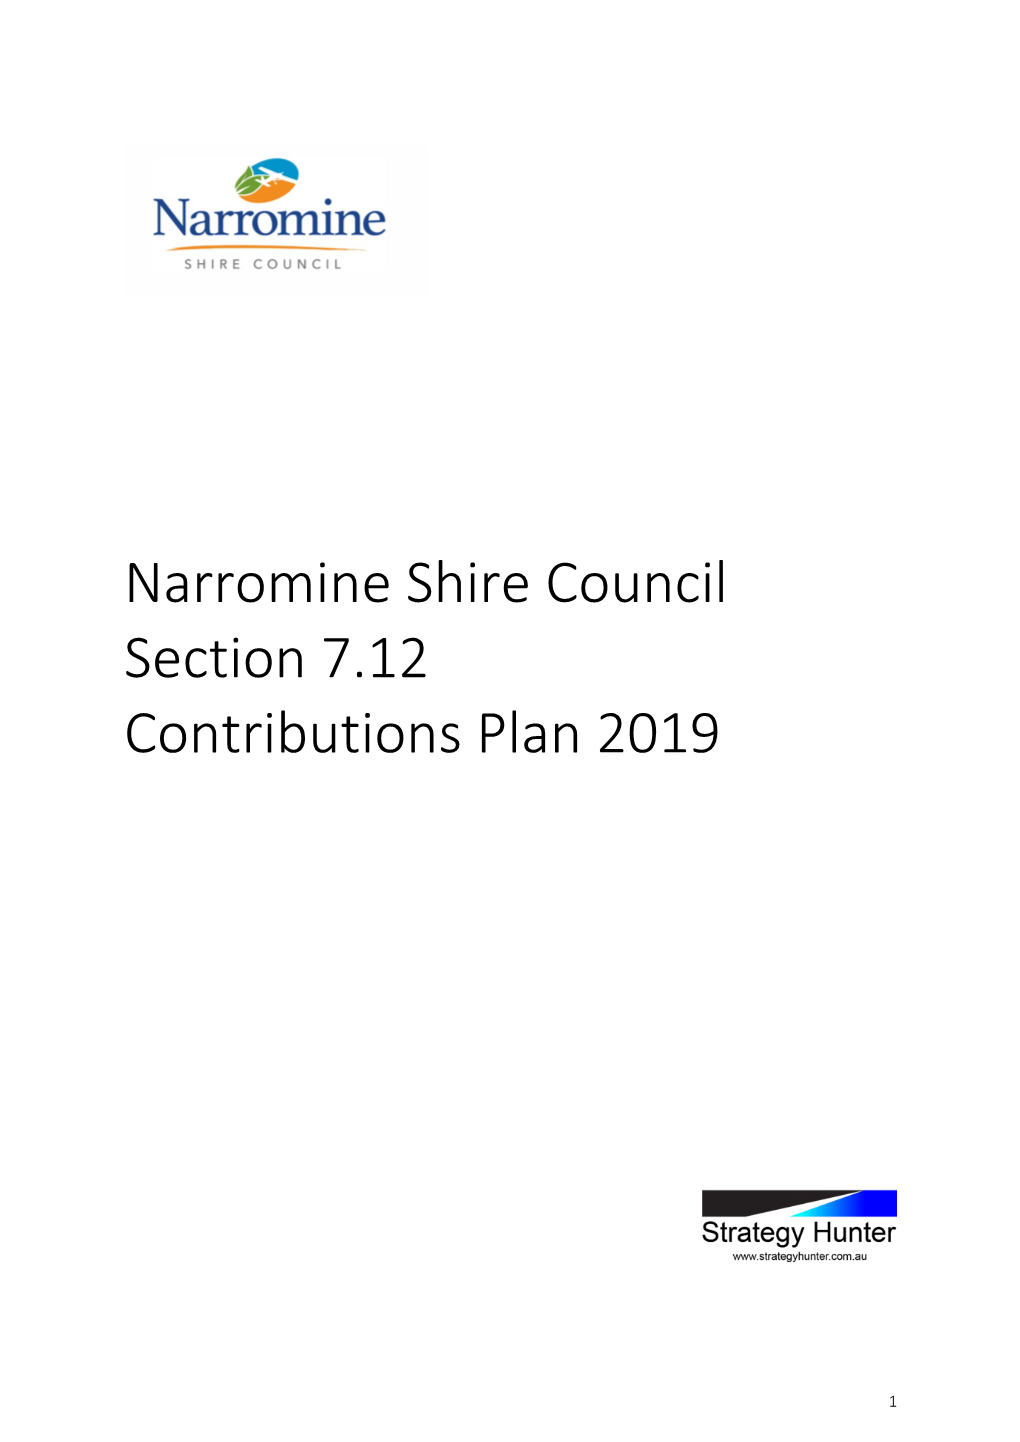 Narromine Shire Council Section 7.12 Contributions Plan 2019